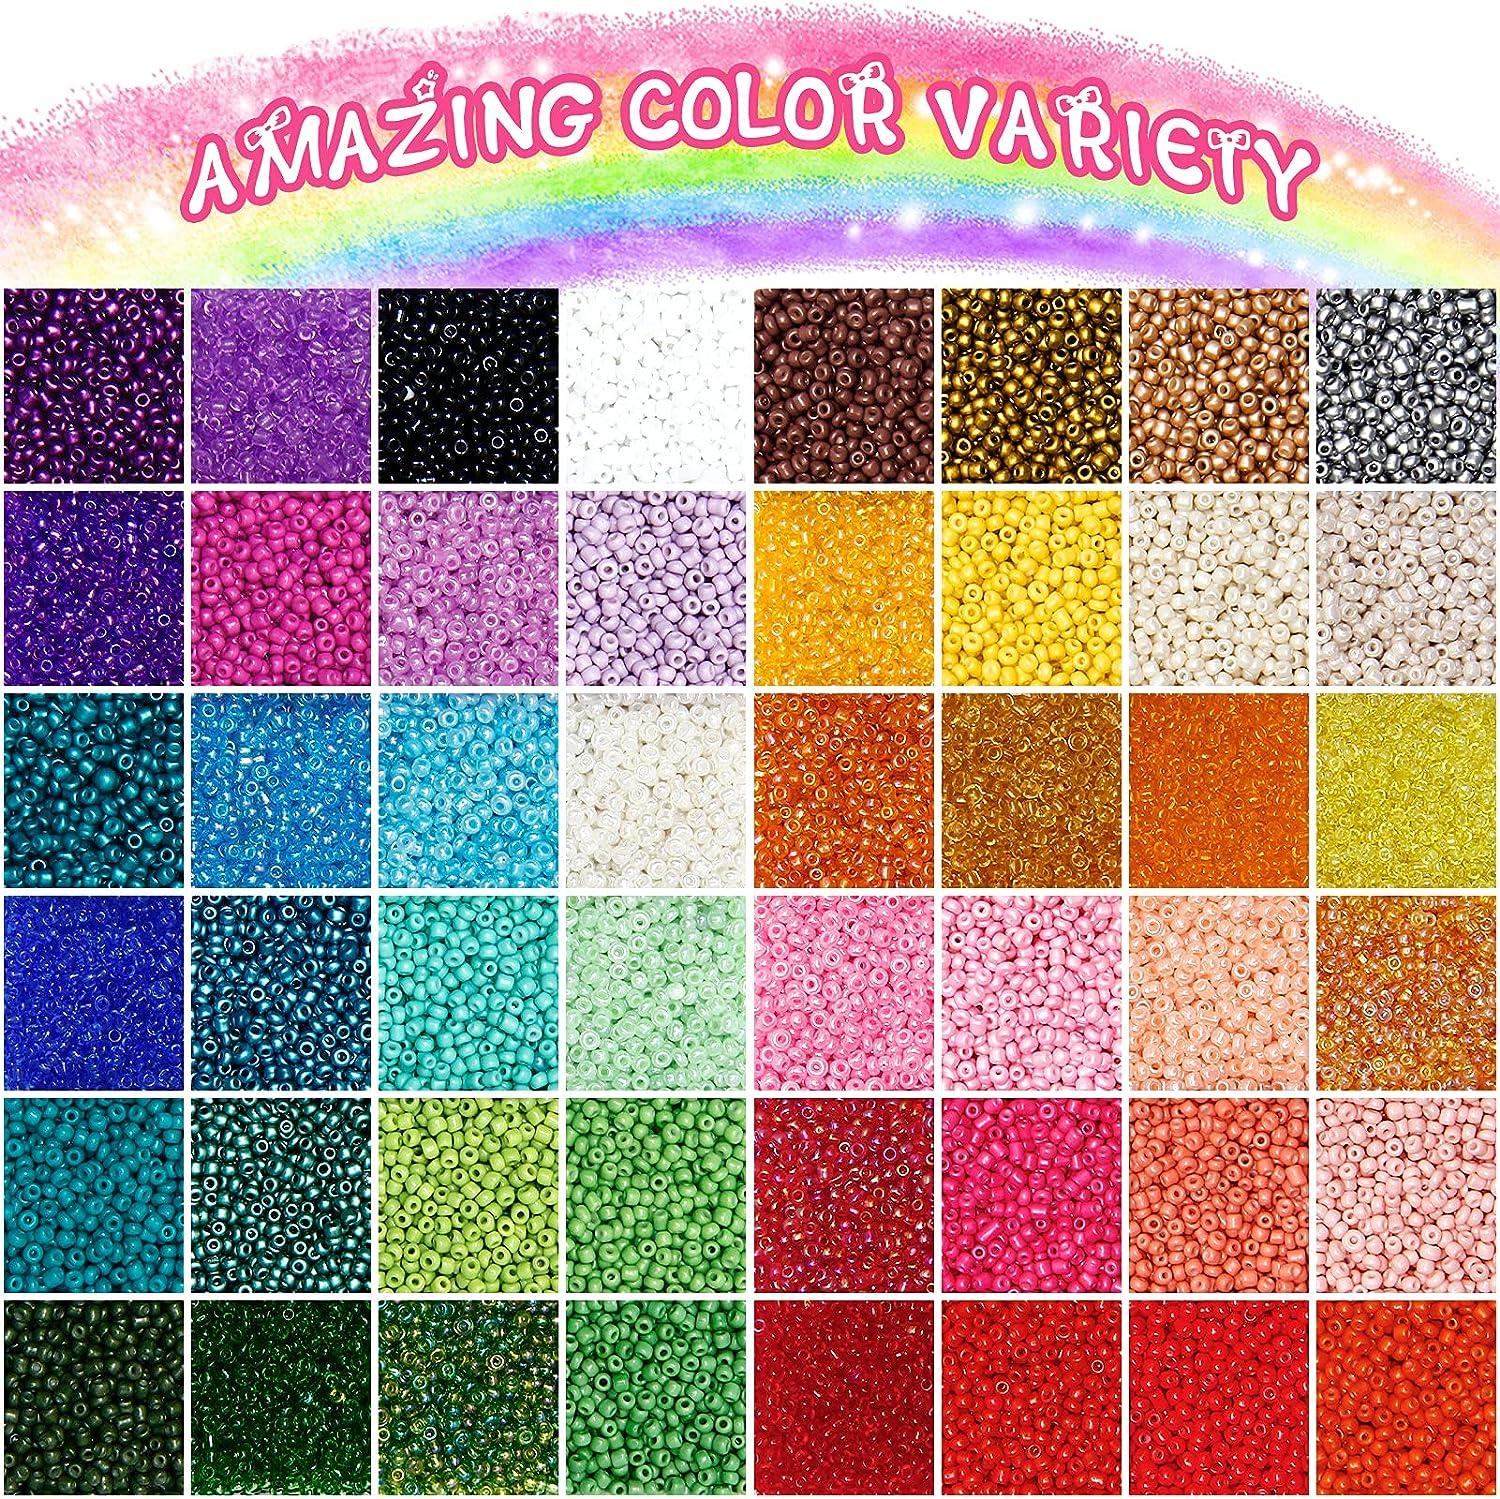 Make A Bracelet With Beads2mm Glass Seed Beads Kit With Tools For Jewelry  Making - 19500pcs